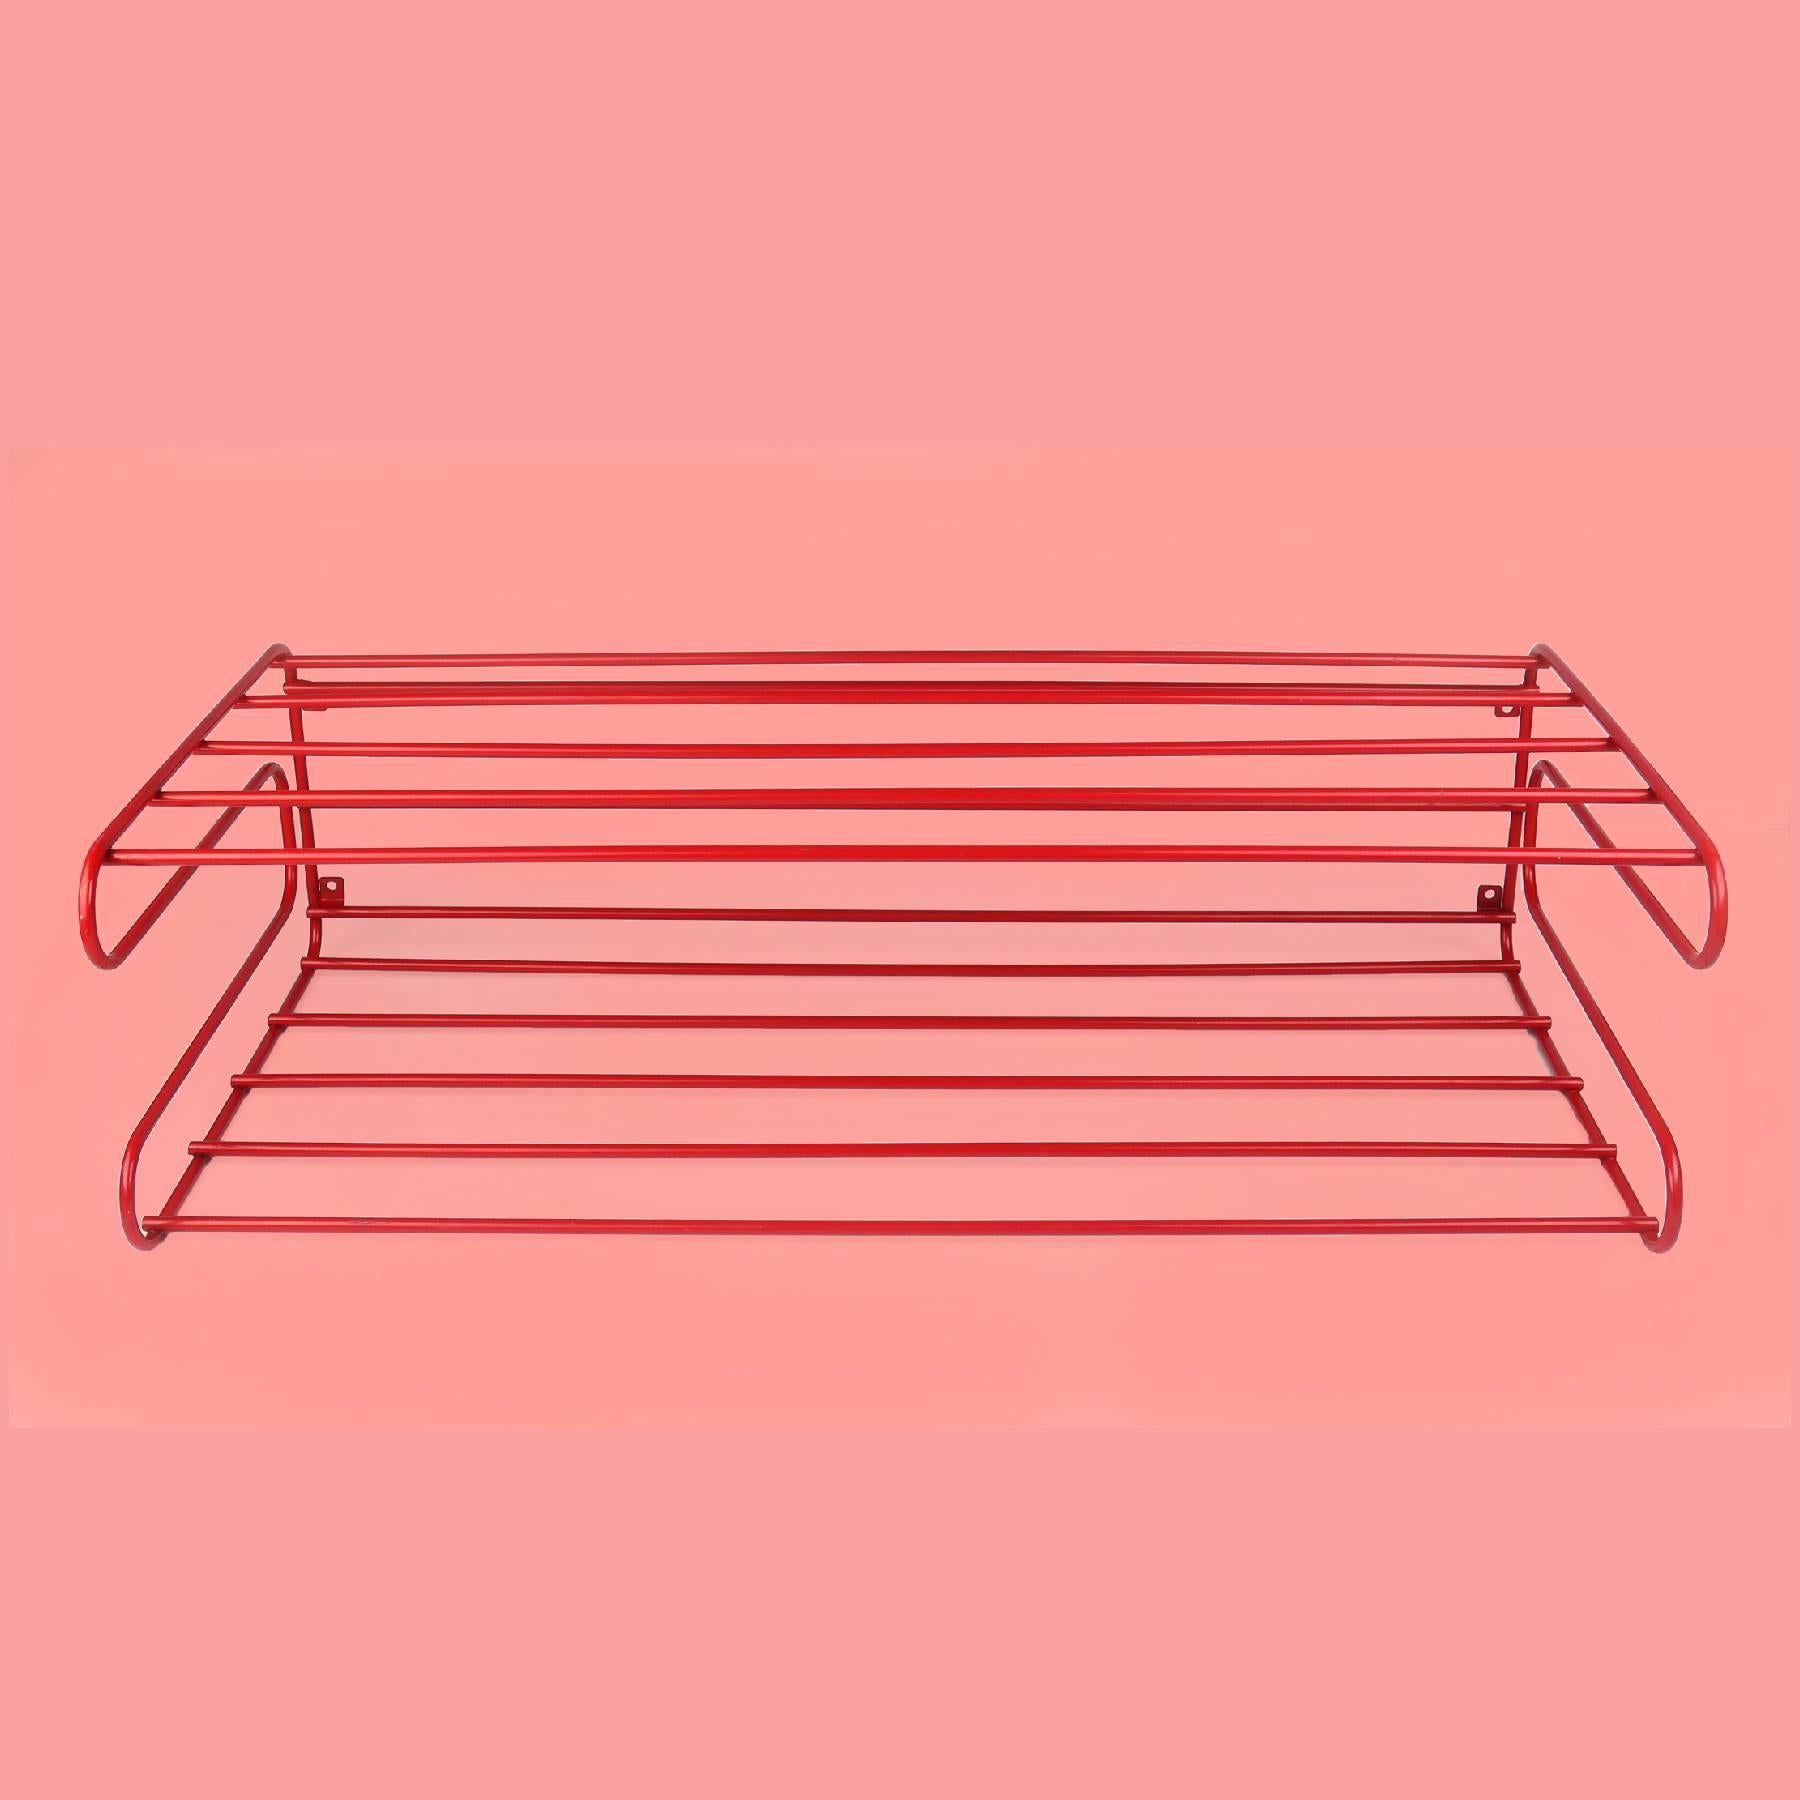 A perfect Mid-Century Modern red coated metal wire shelf or rack. In the style of Tomado or Pilastro, this piece is in perfect vintage condition with the original mounting hardware. (Mounts to the wall with four screws or anchors.) Can be used with